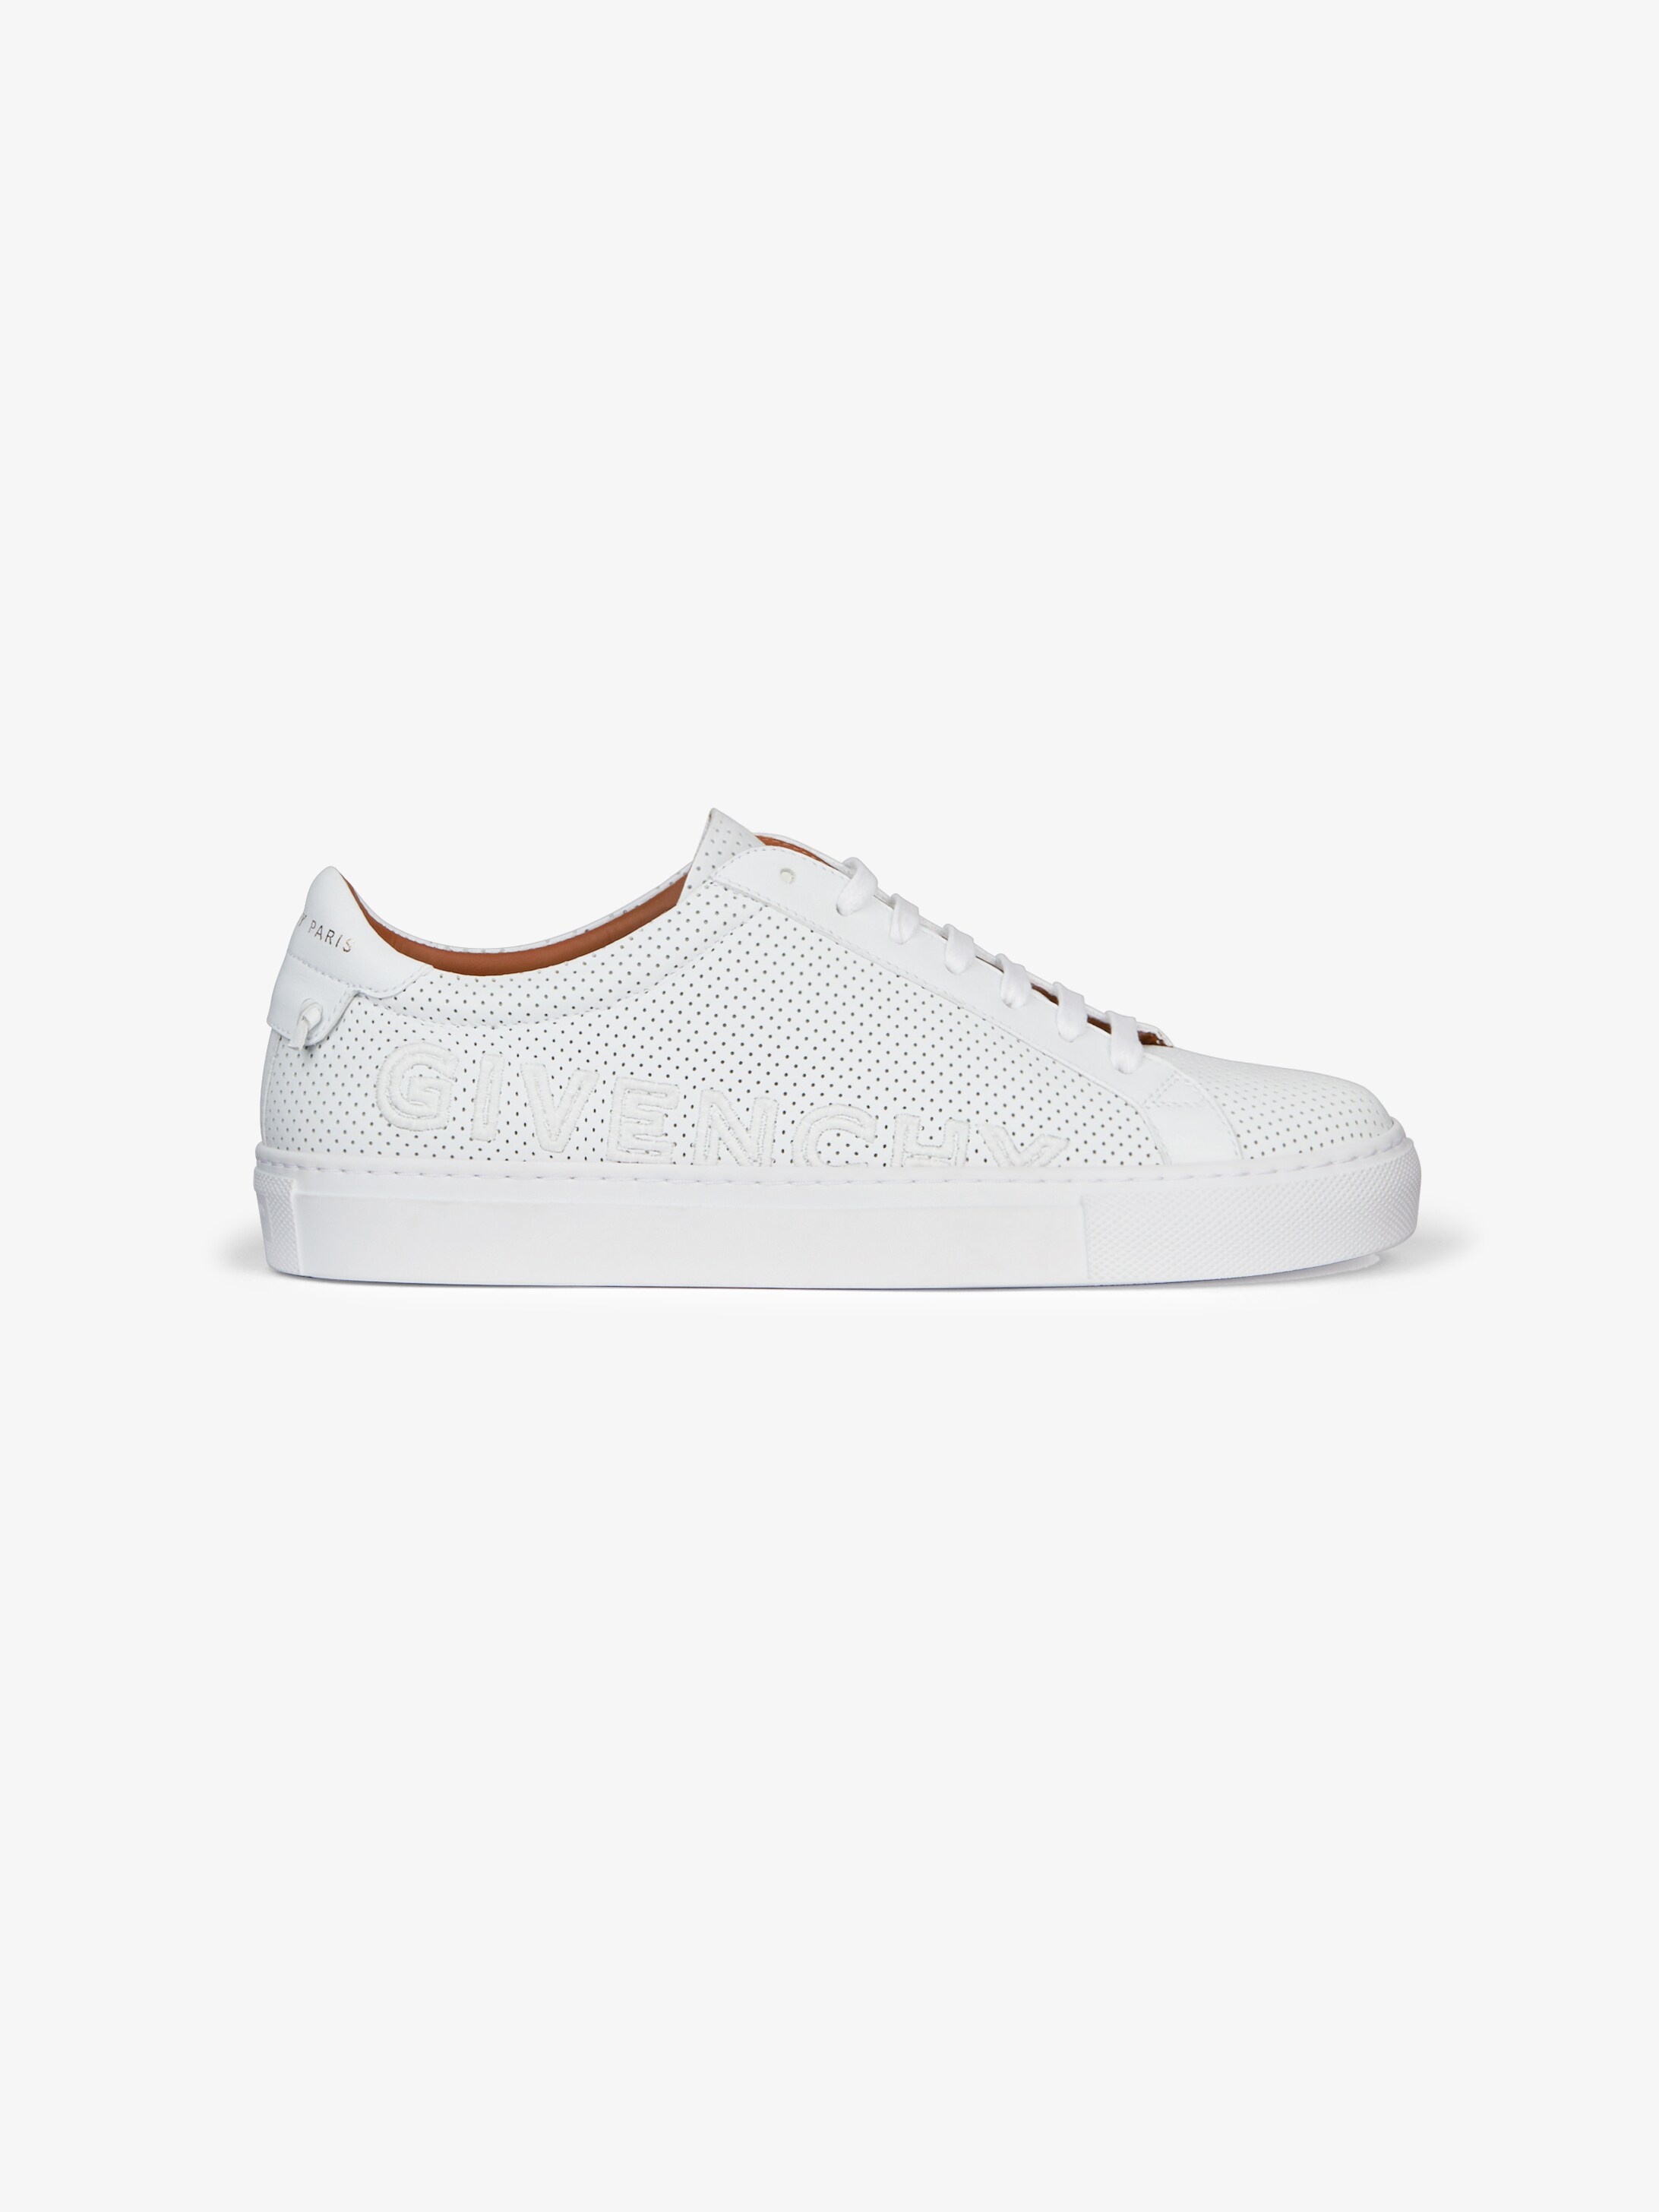 GIVENCHY sneakers in perforated leather 